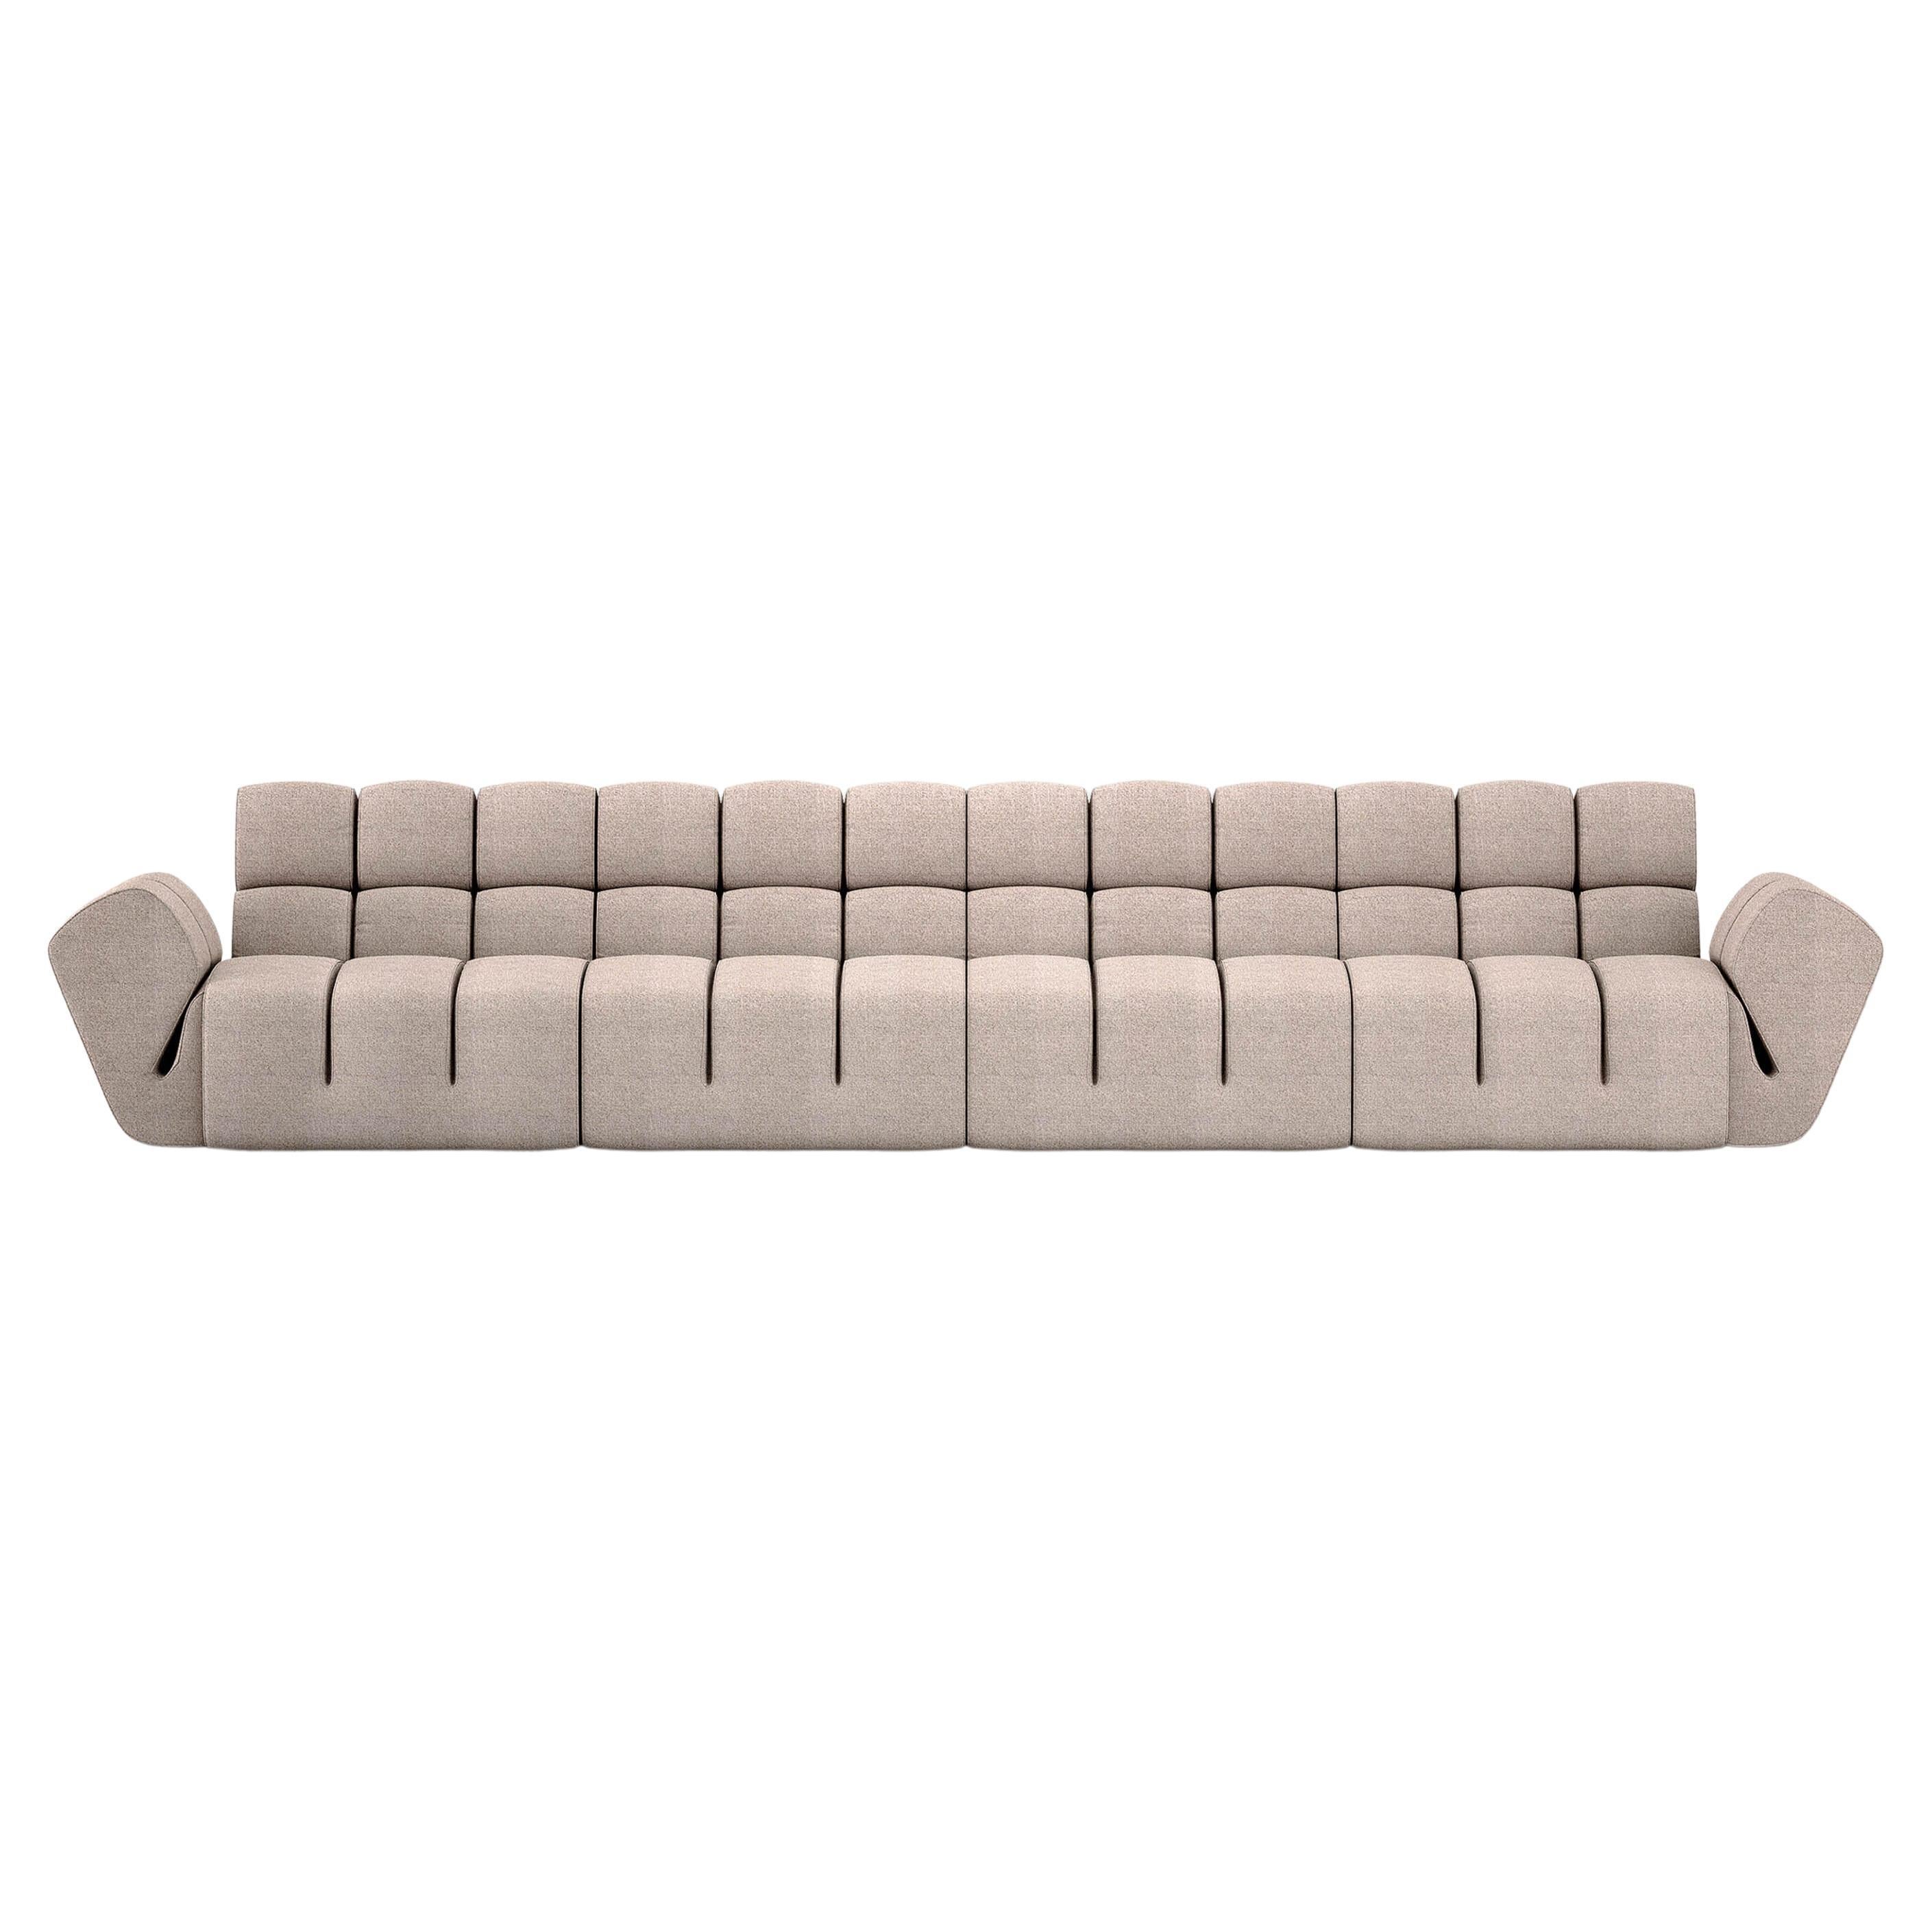 Contemporary Sectional Sofa 'Palmo' by Amura Lab, Brera 850, Ref. 13 For Sale